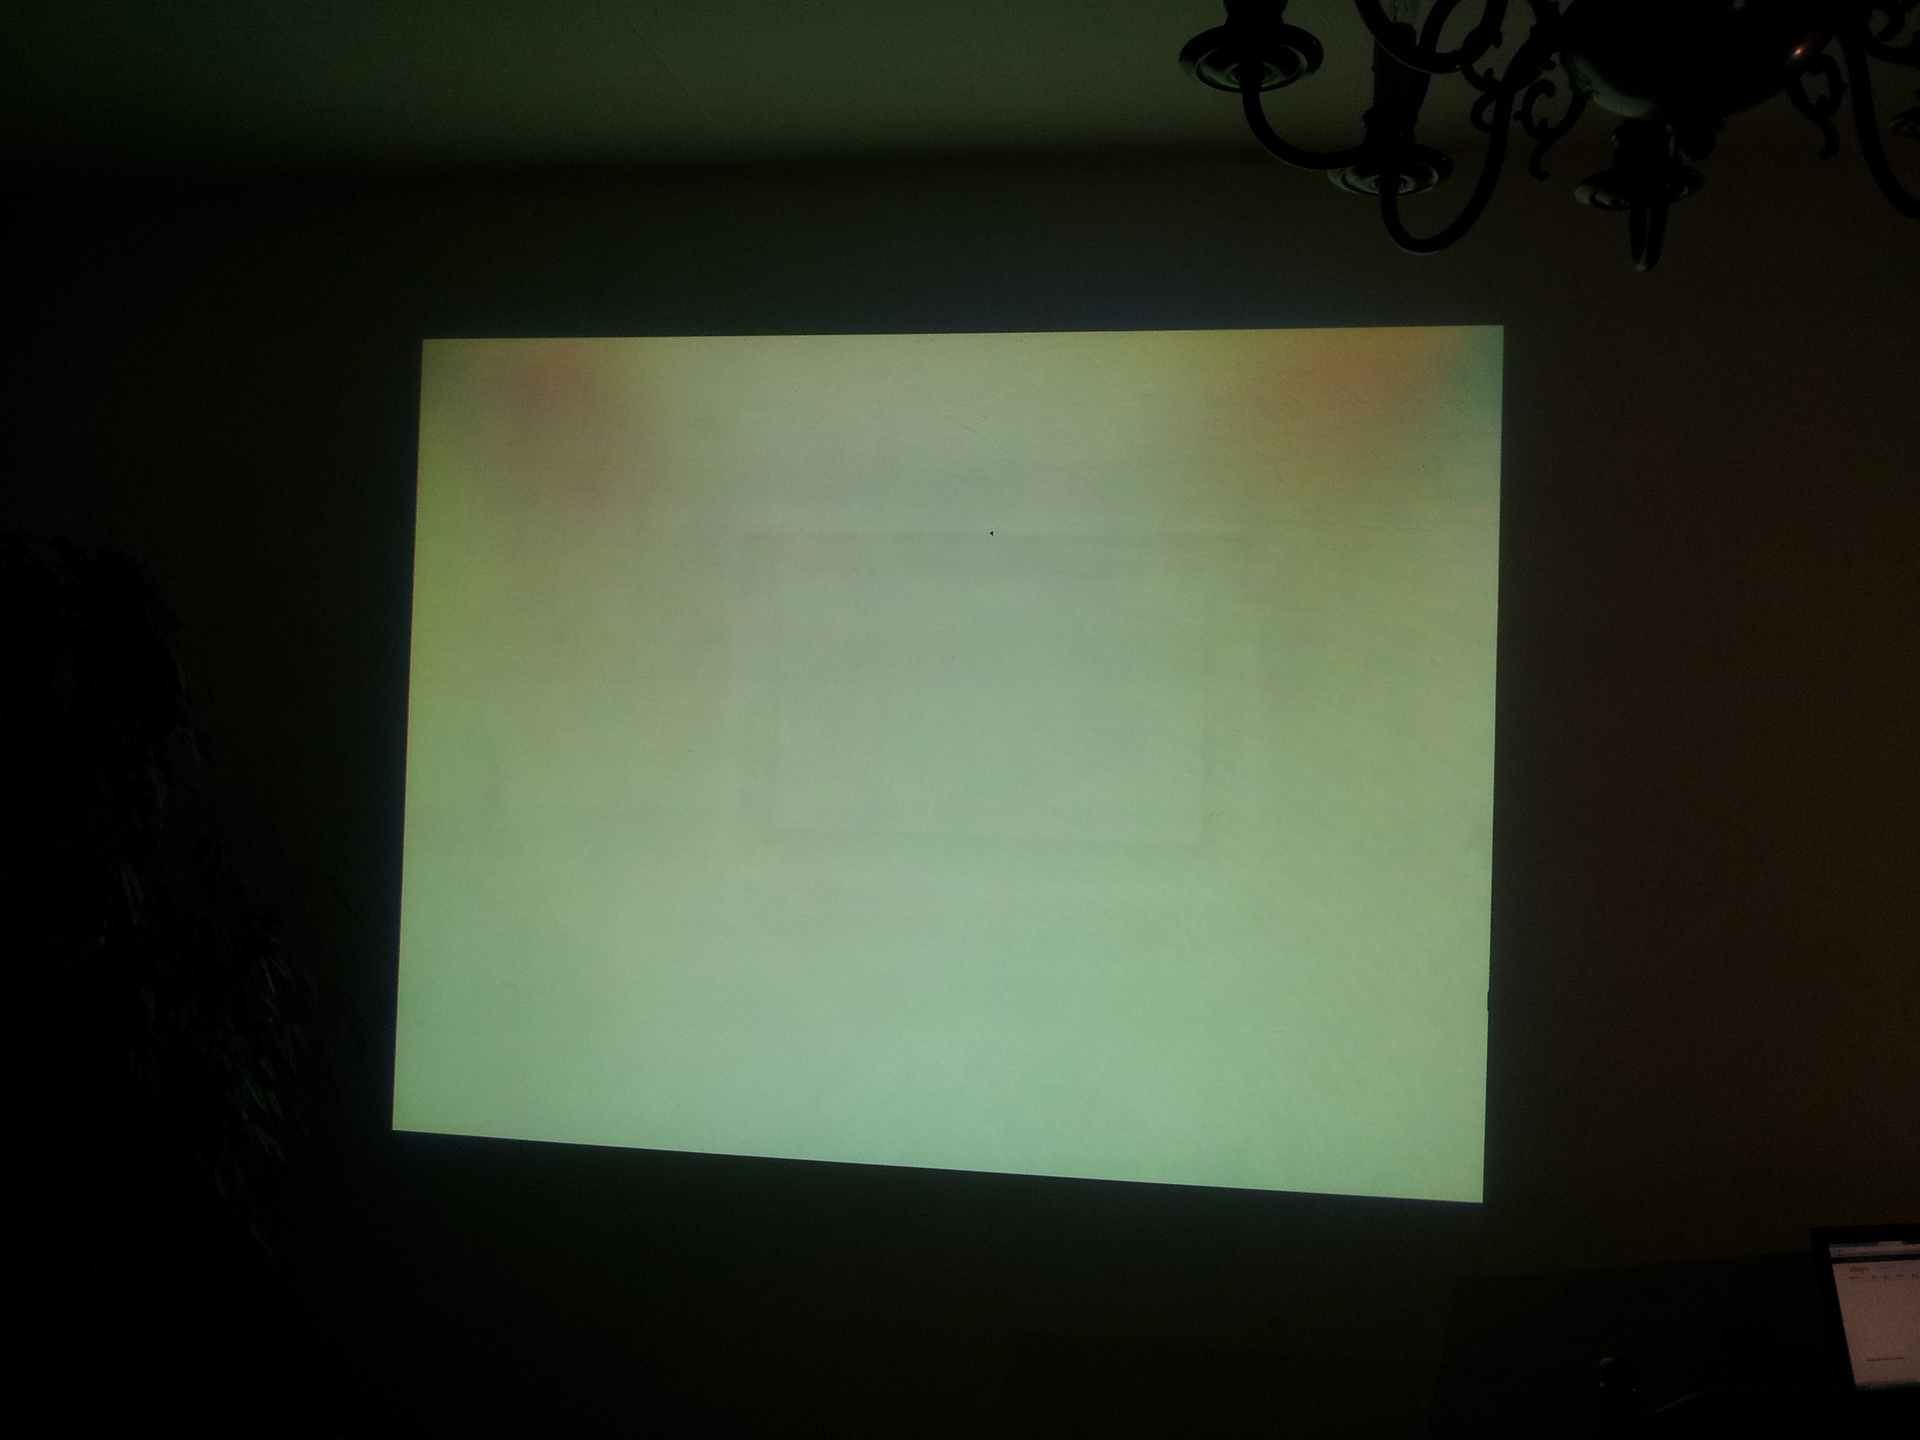 pyle widescreen led projector 1080p